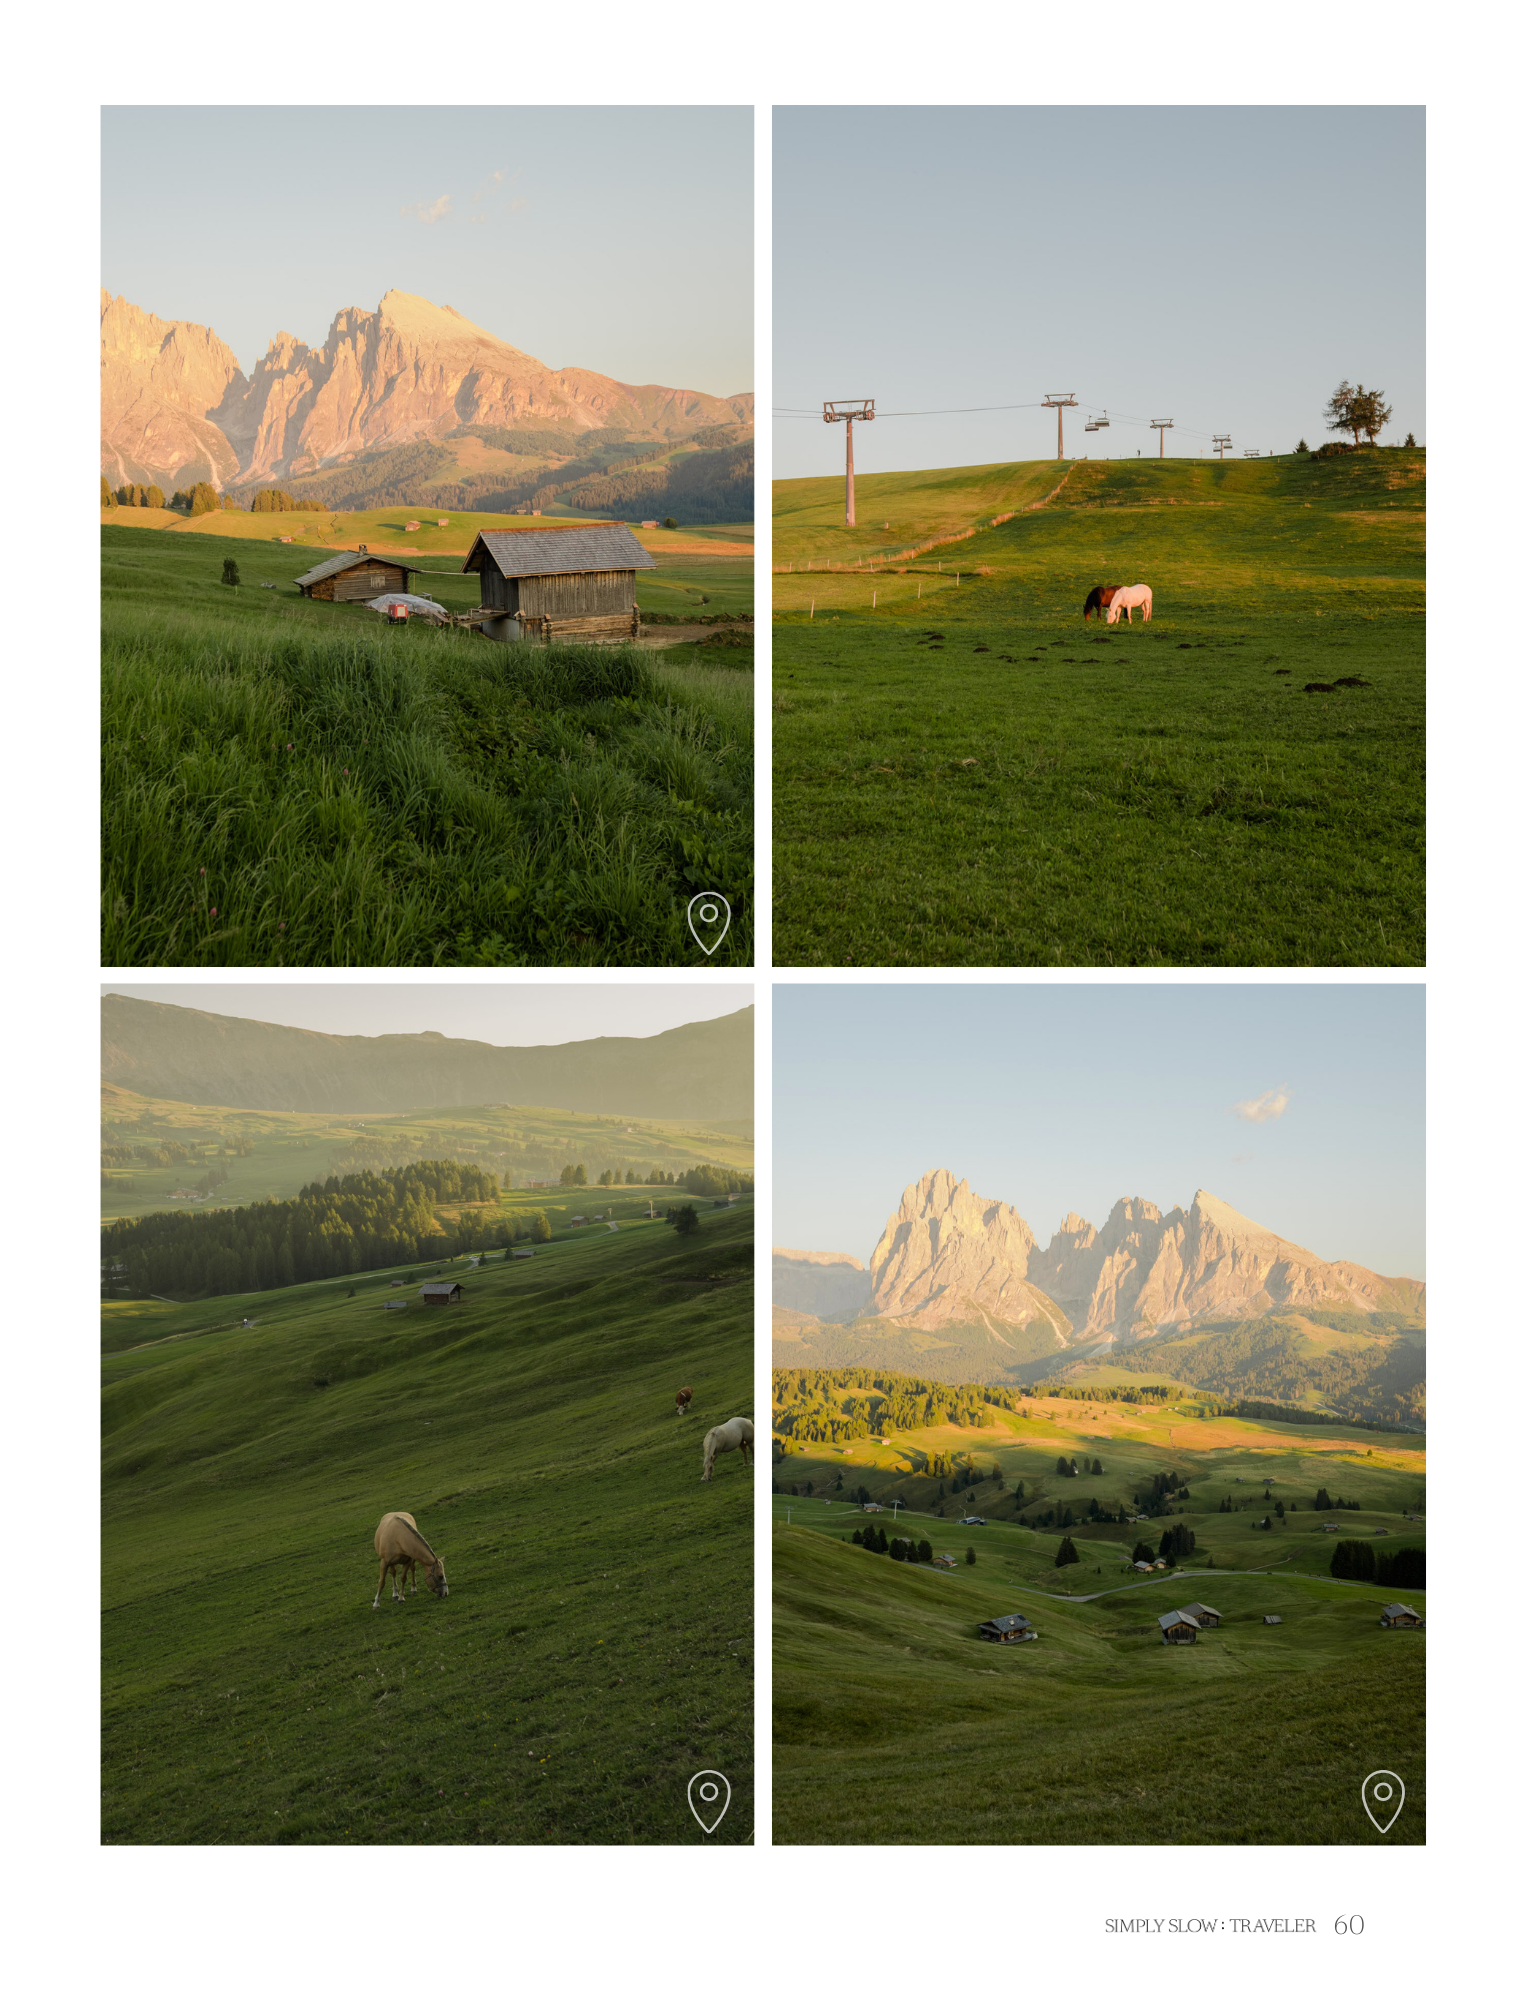 A Guide to the Dolomites - a page with photos of Alpe di Siusi, by Simply Slow Traveler